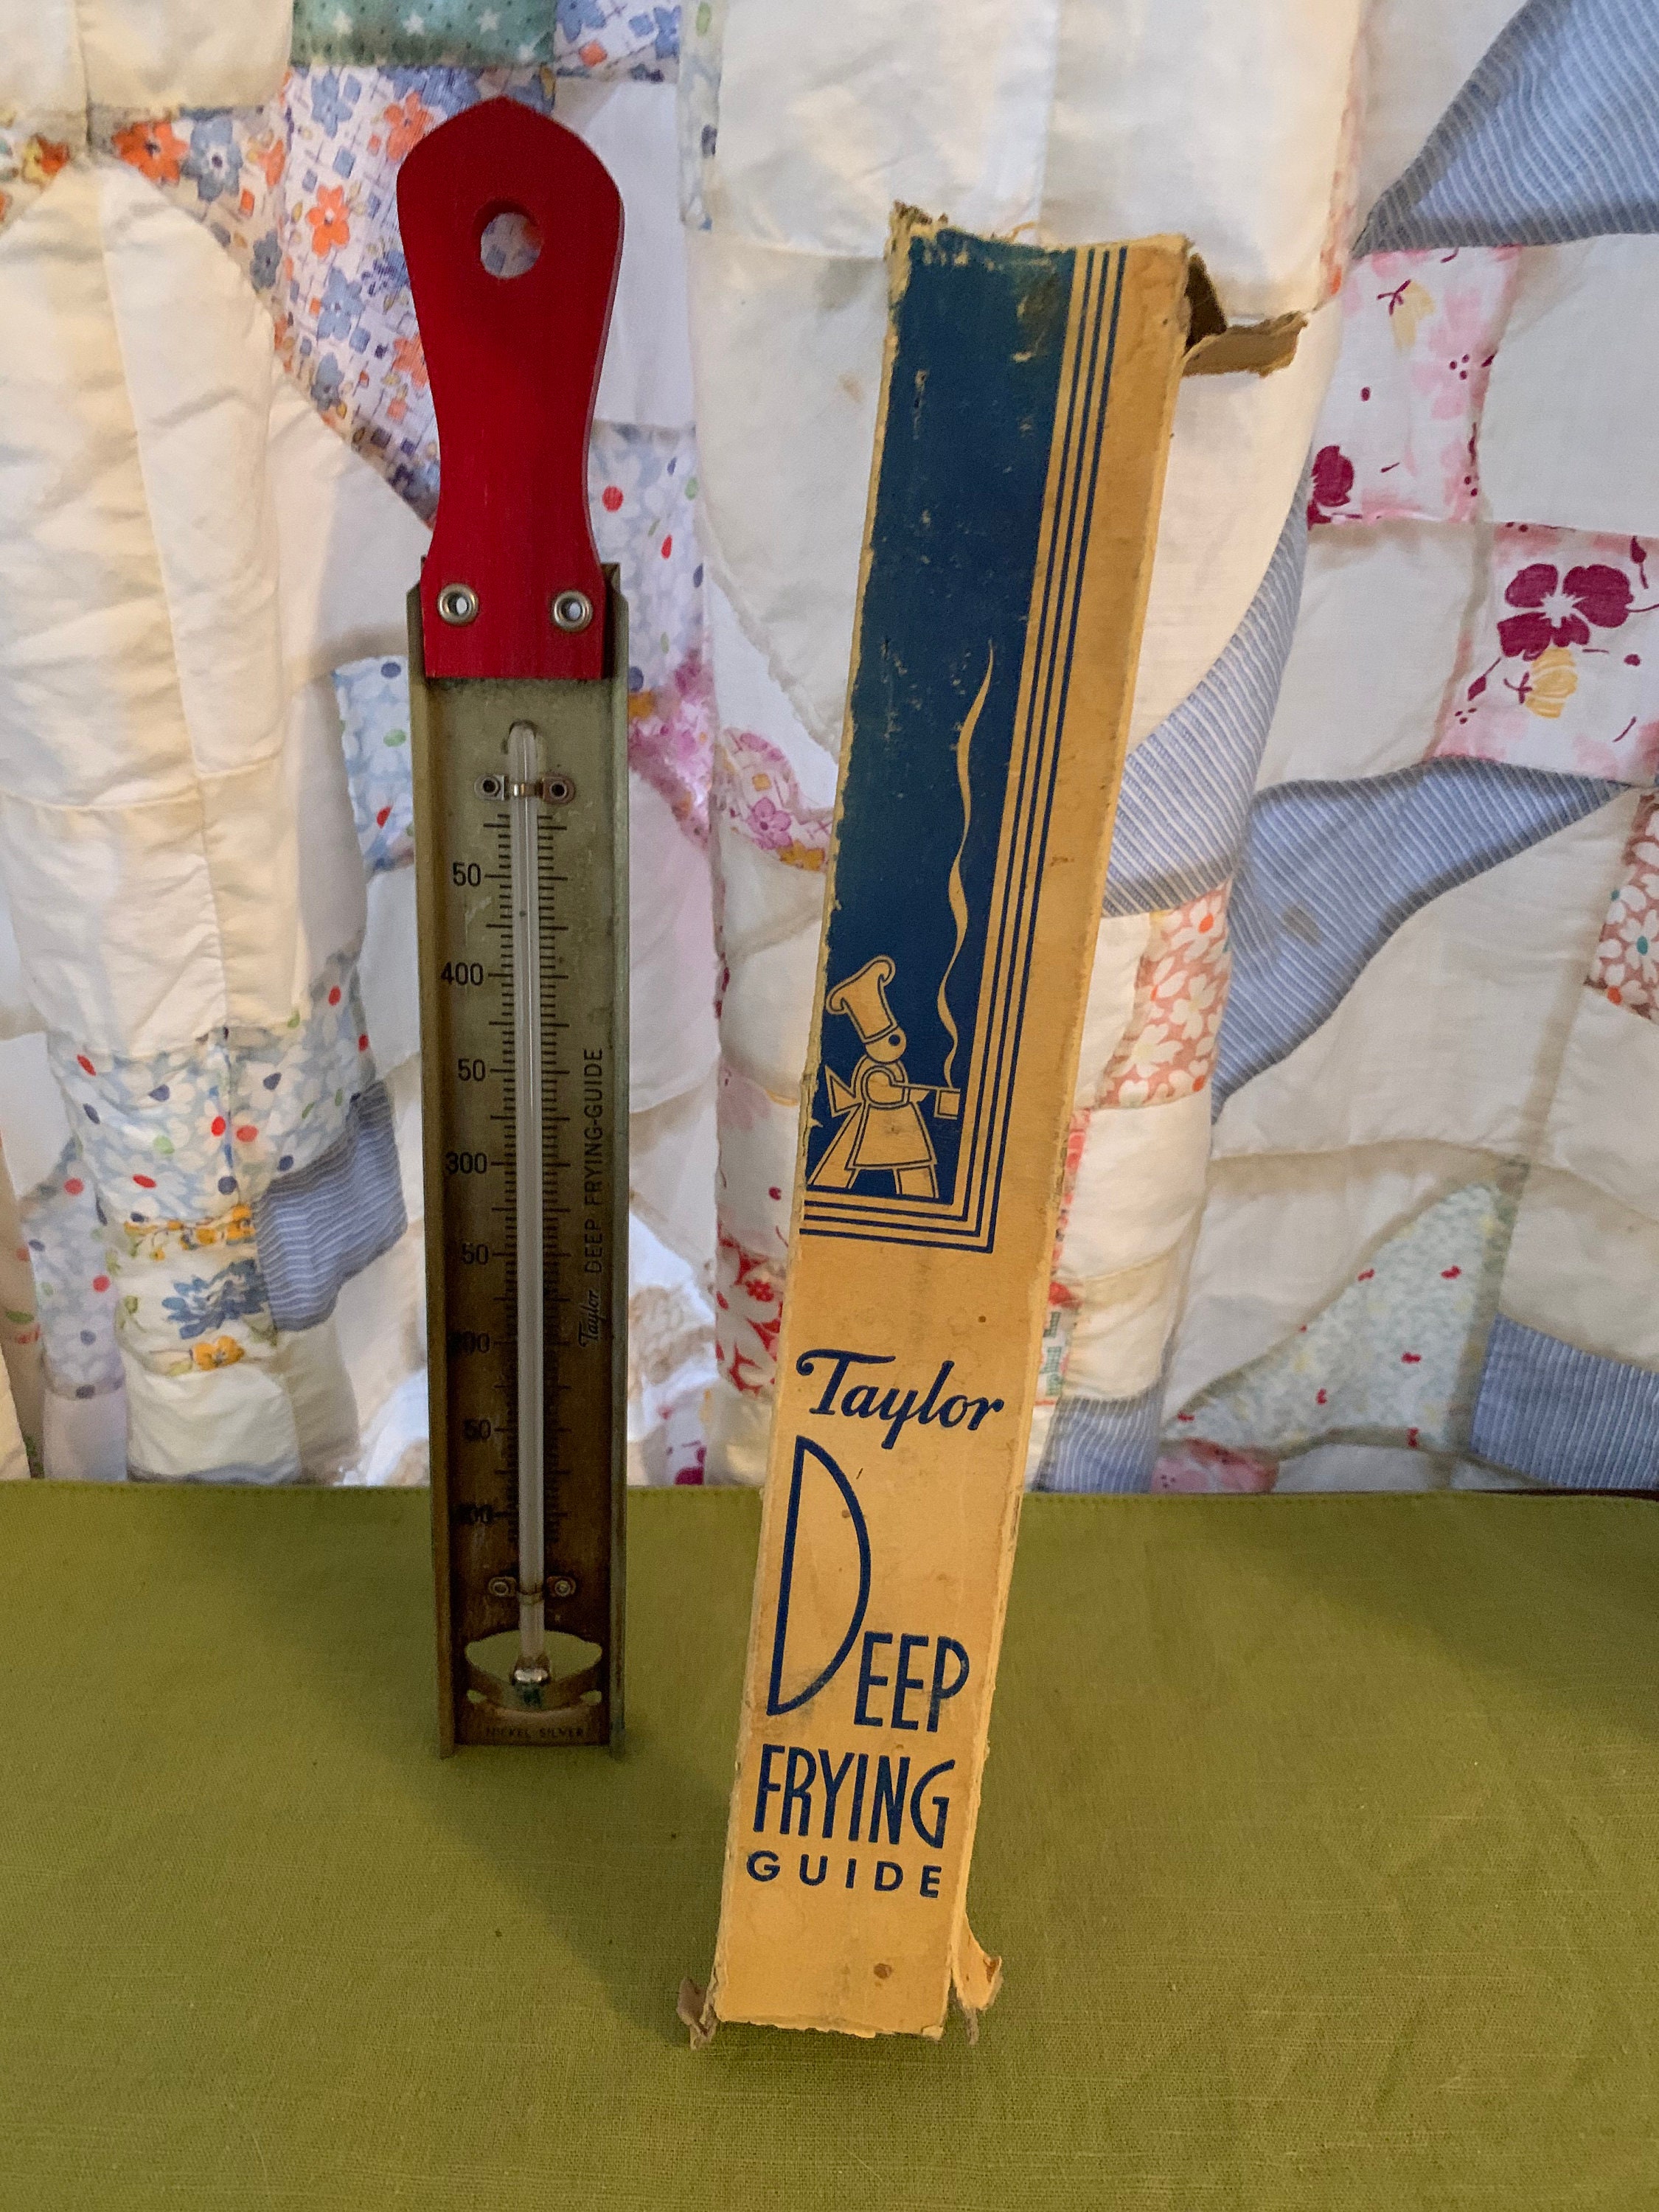 2 Vintage Taylor Nickel Silver Candy And Fry Oil Thermometer Therm